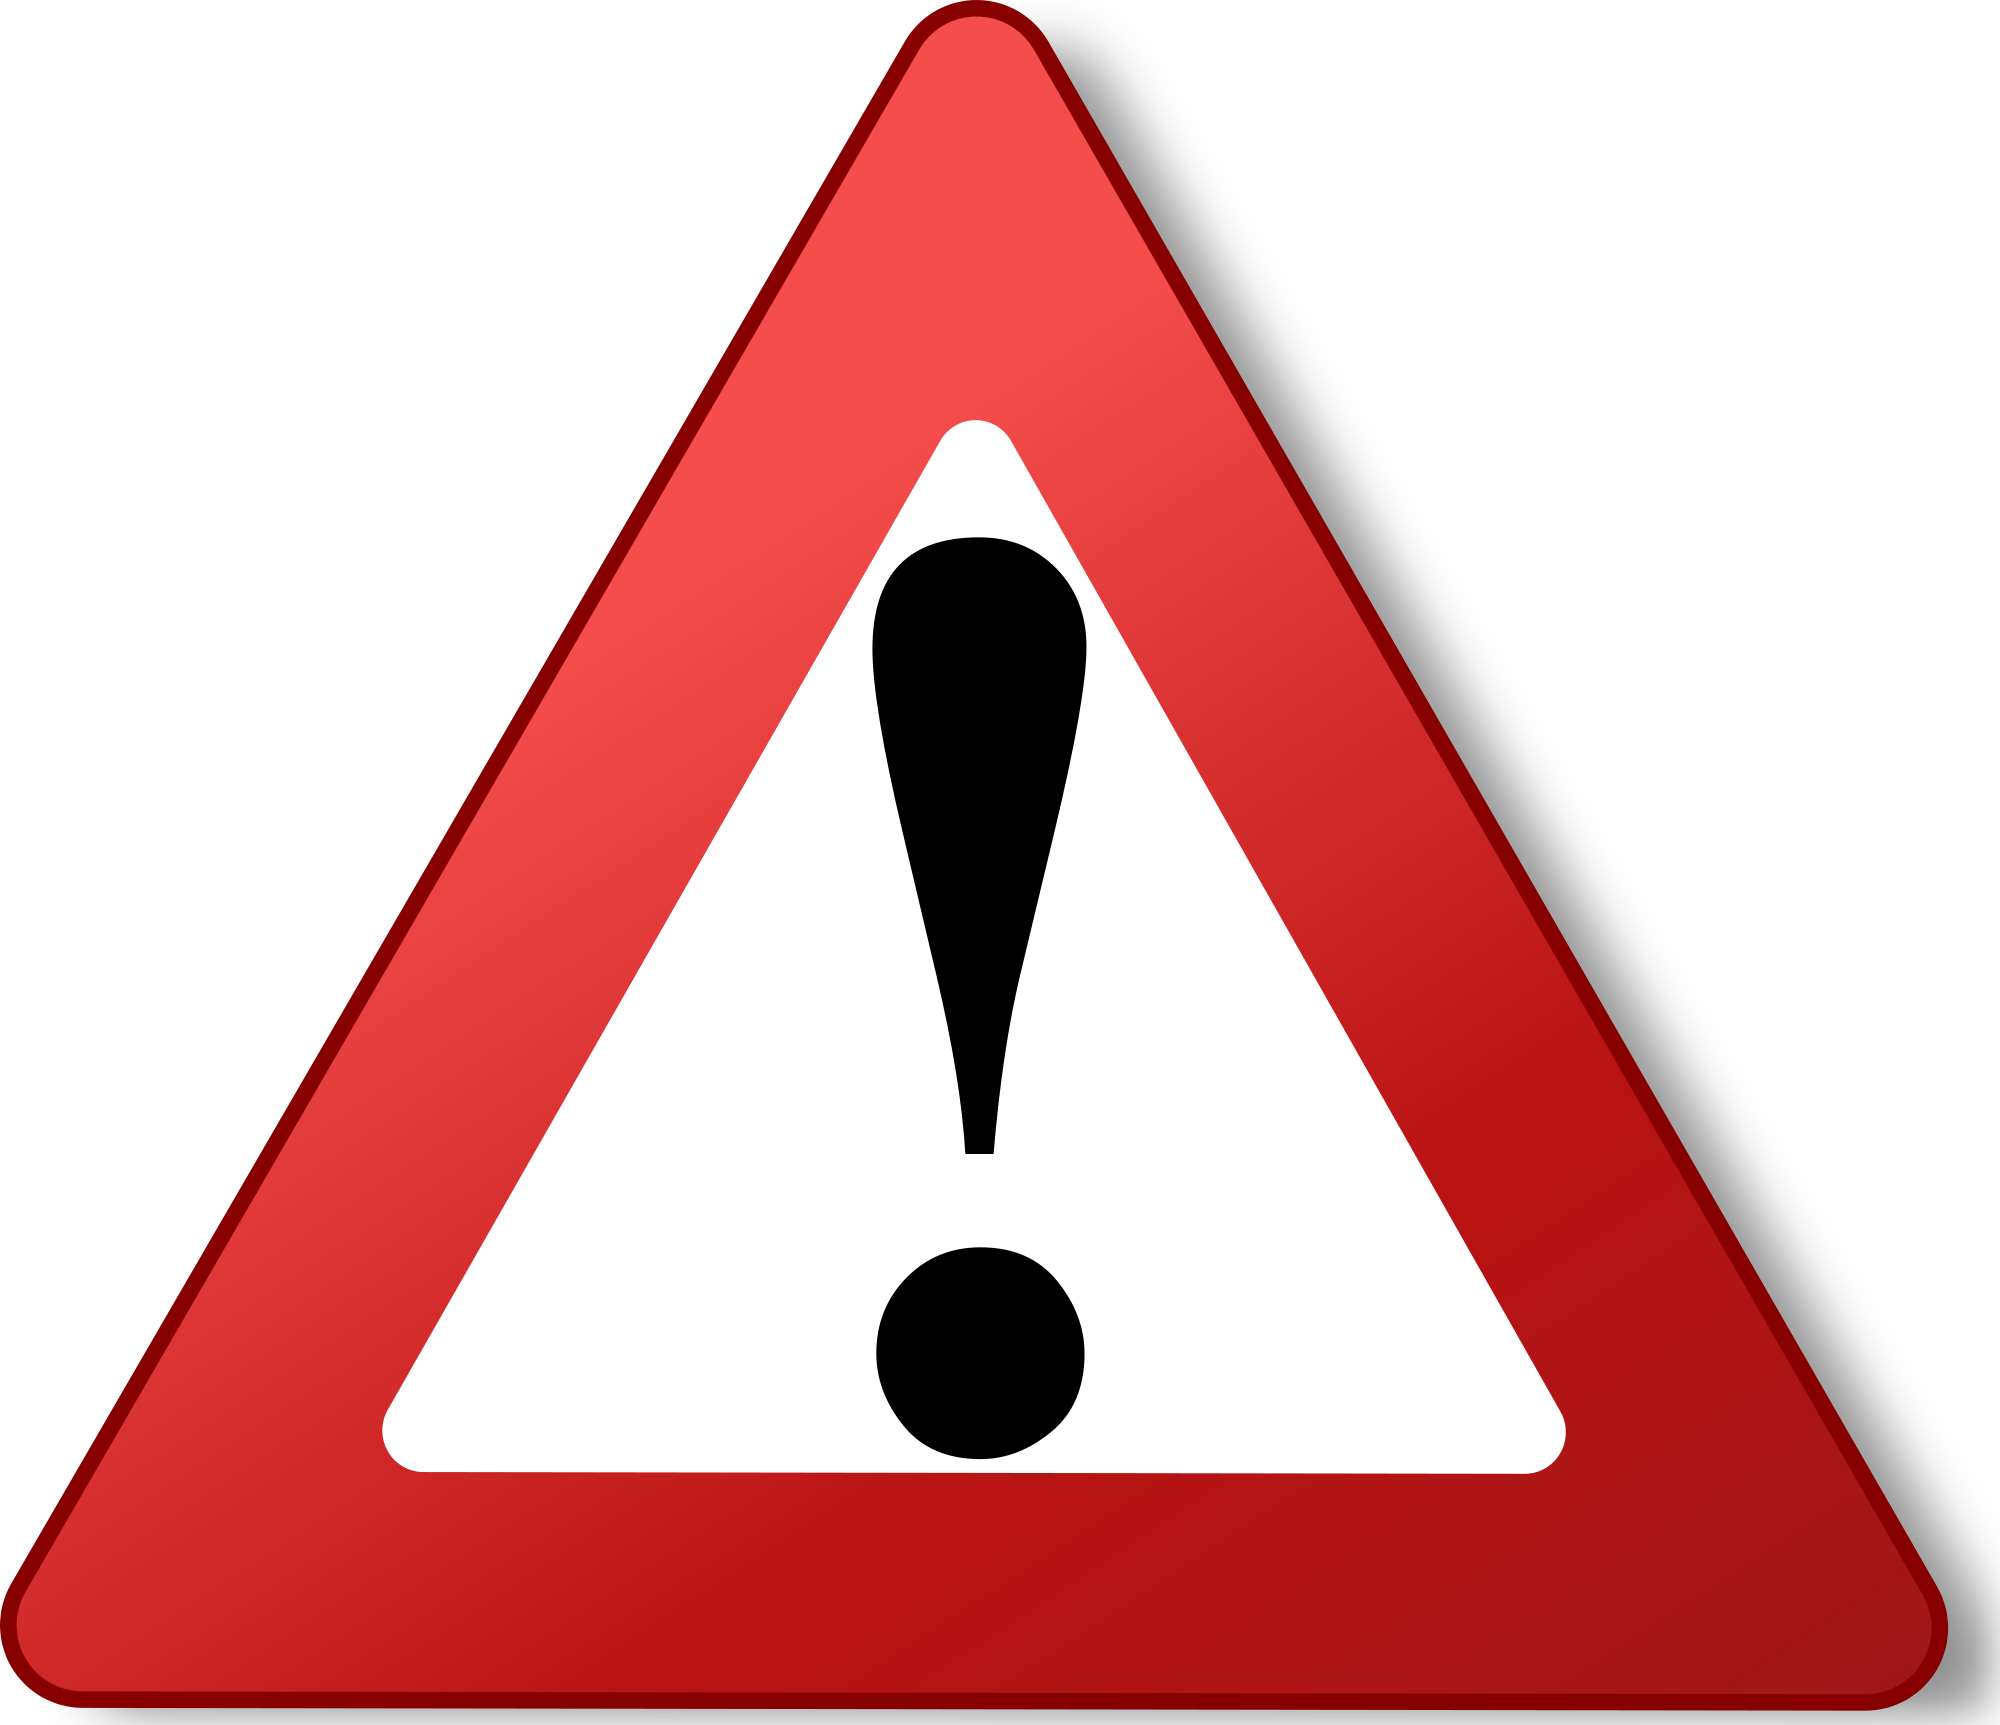 Warning Sign Template - Clipart library